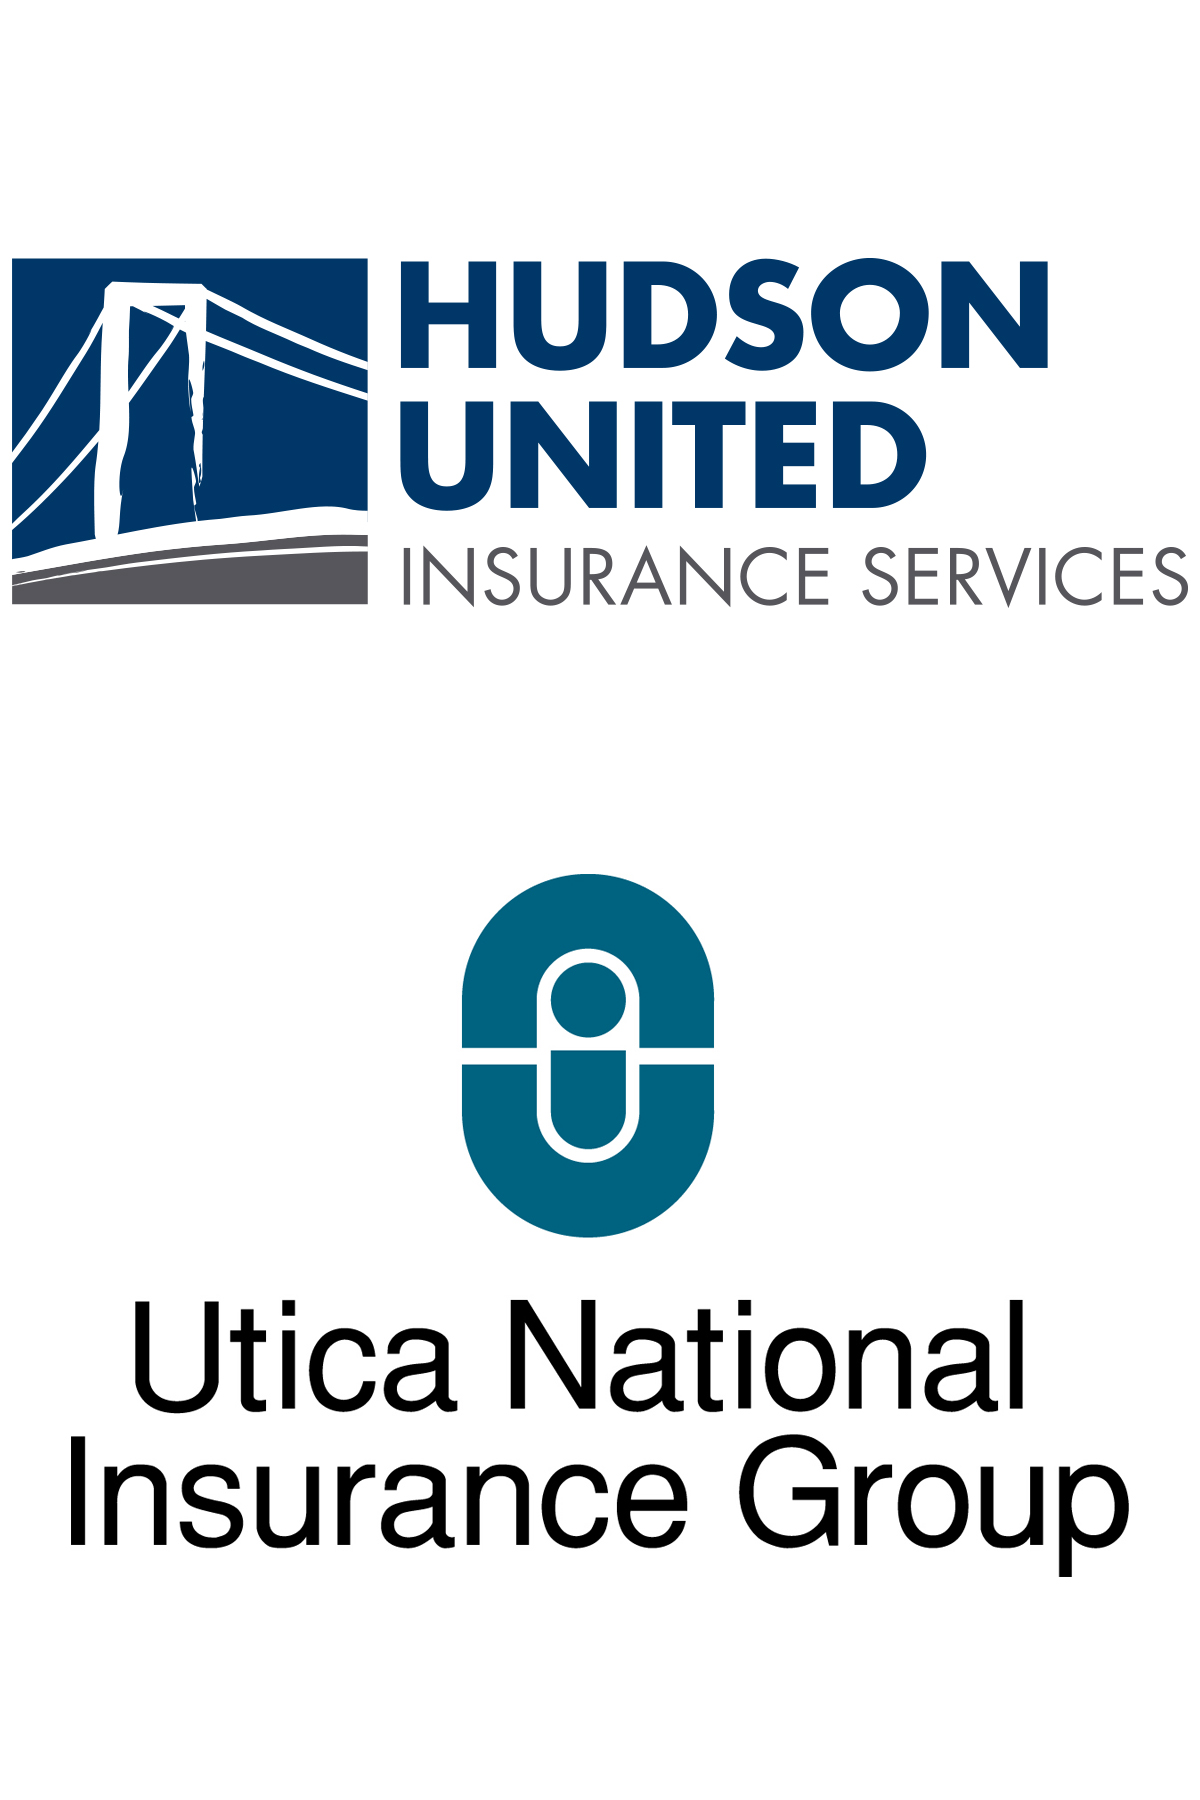 Hudson United Insurance Services LLC Partners With Utica National